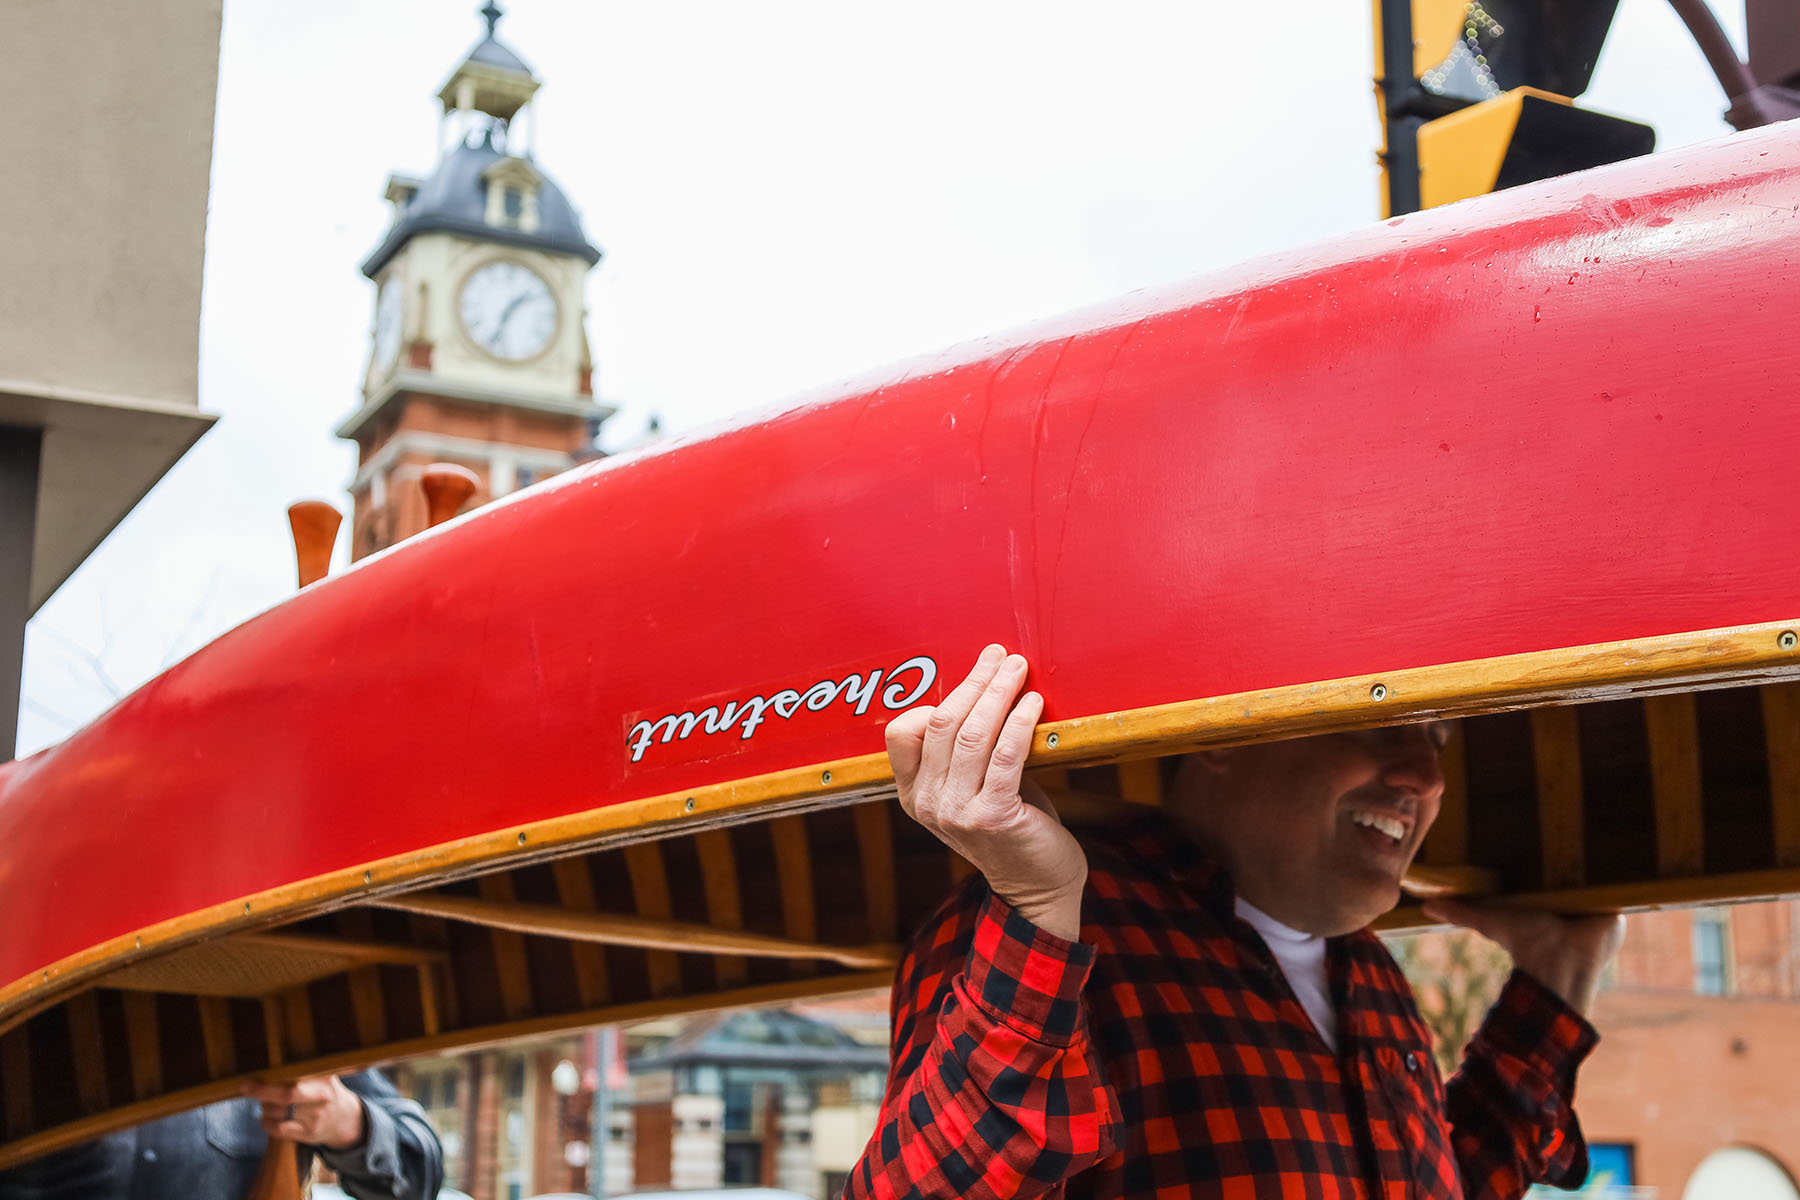 A man in red and black plaid portages or carries a red Chestnut canoe in downtown Peterborough with the Market Hall clock tower in the background.